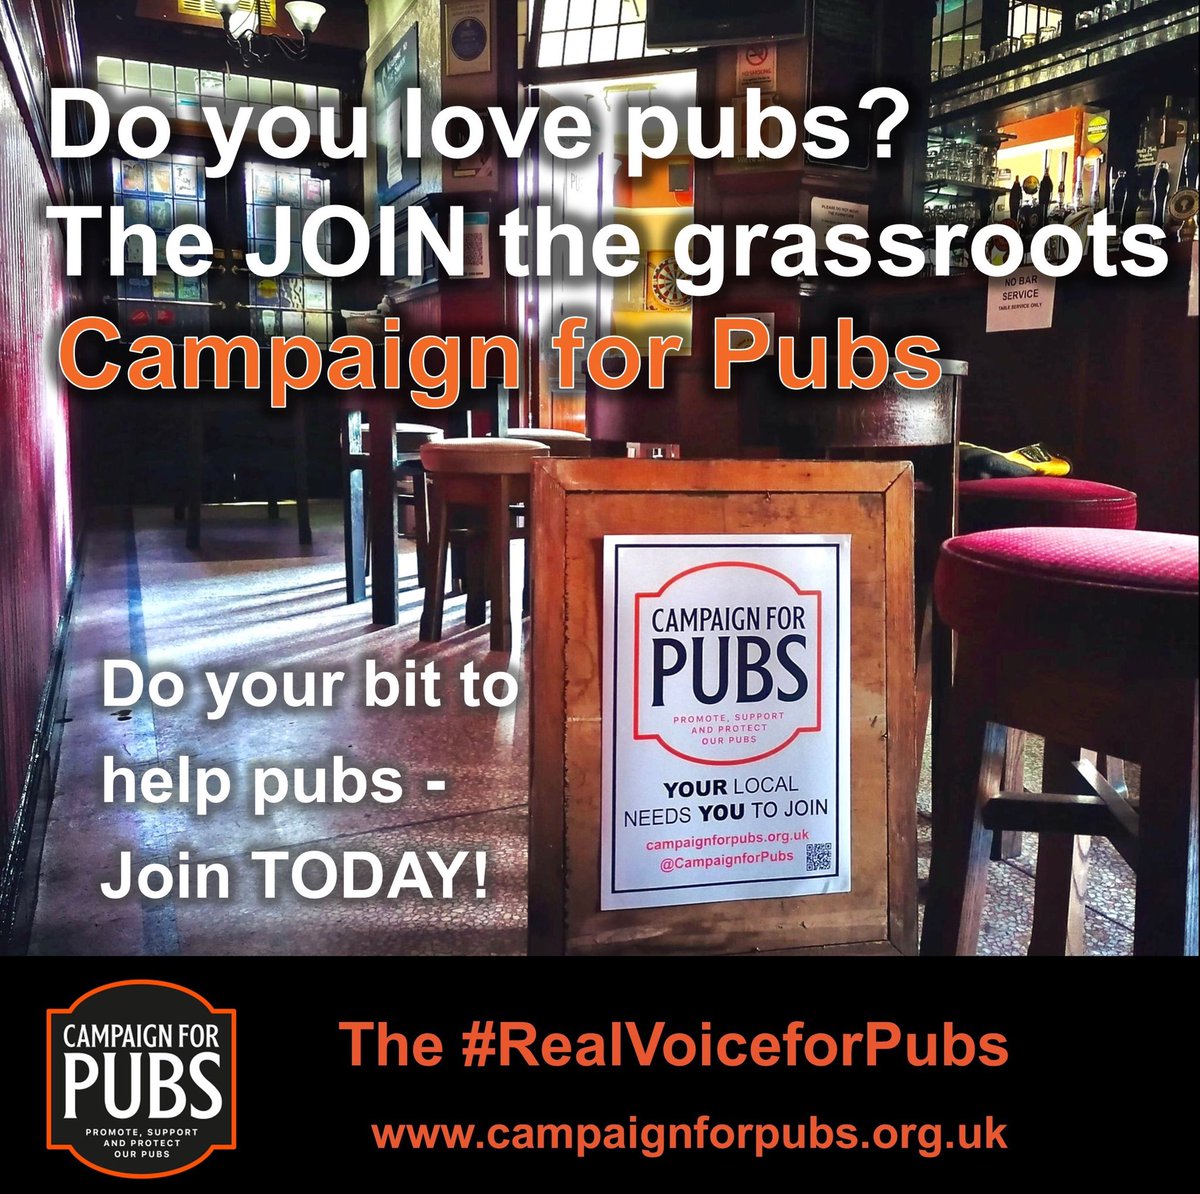 We’re nearly at 5000 Twitter followers #pub lovers, pls follow & RT 

We need to fight for the future of our #pubs! 

You can help #SaveOurPubs: JOIN the grassroots #CampaignforPubs for just £25/yr or £2.08/month! ⬇️

campaignforpubs.org.uk/about-campaign…

#RealVoiceforPubs #SupportOurPubs